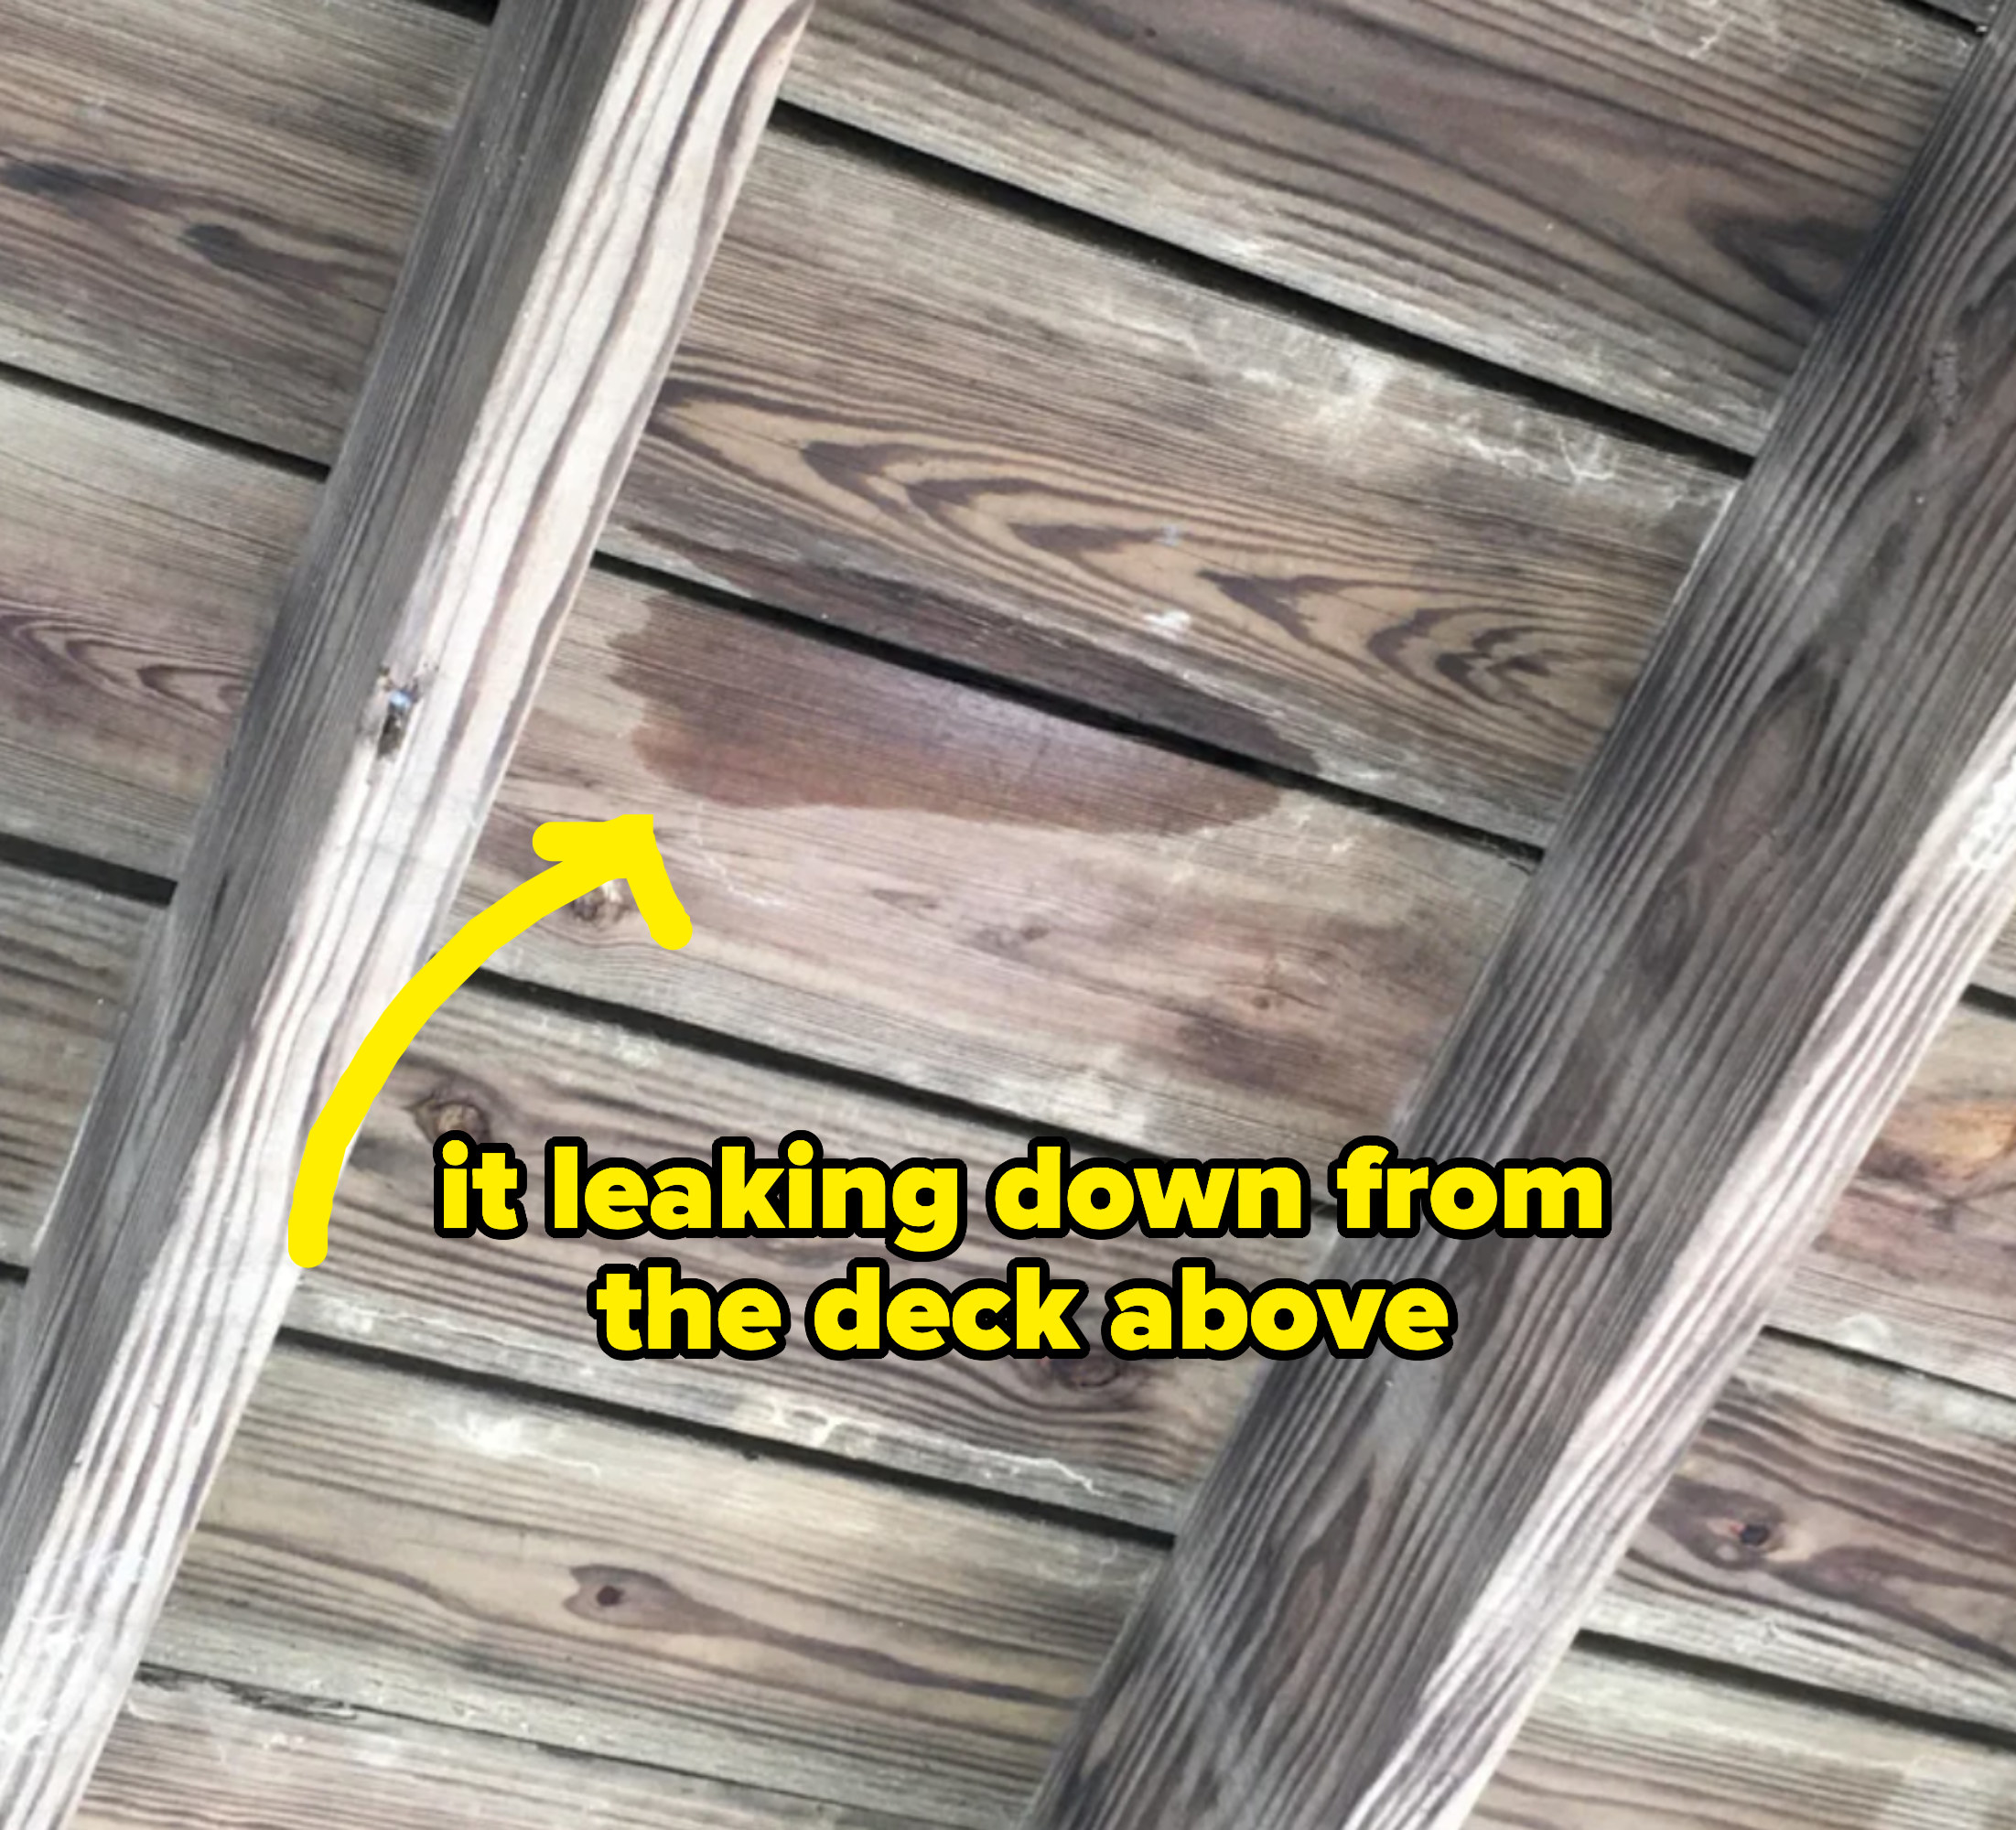 Pee leaking down from the deck above